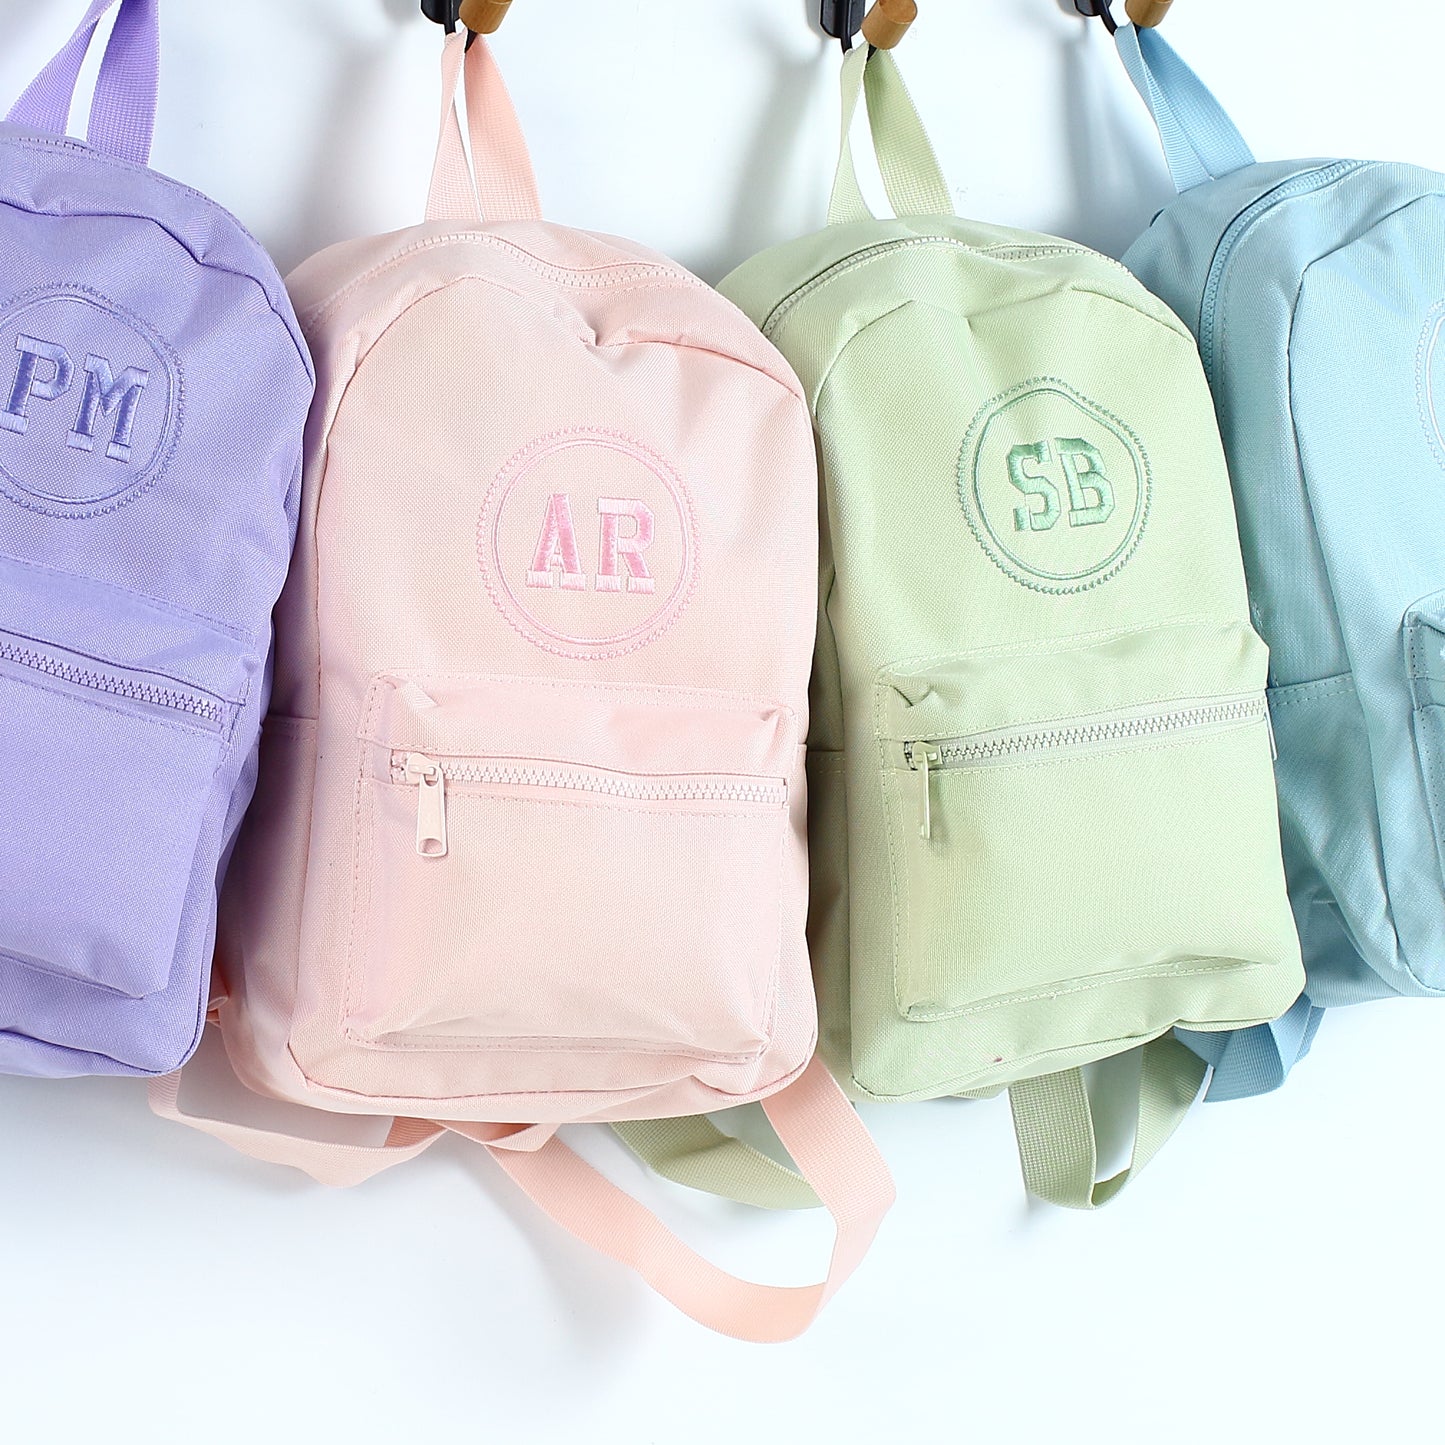 NEW - Embroidered Toddler Backpack